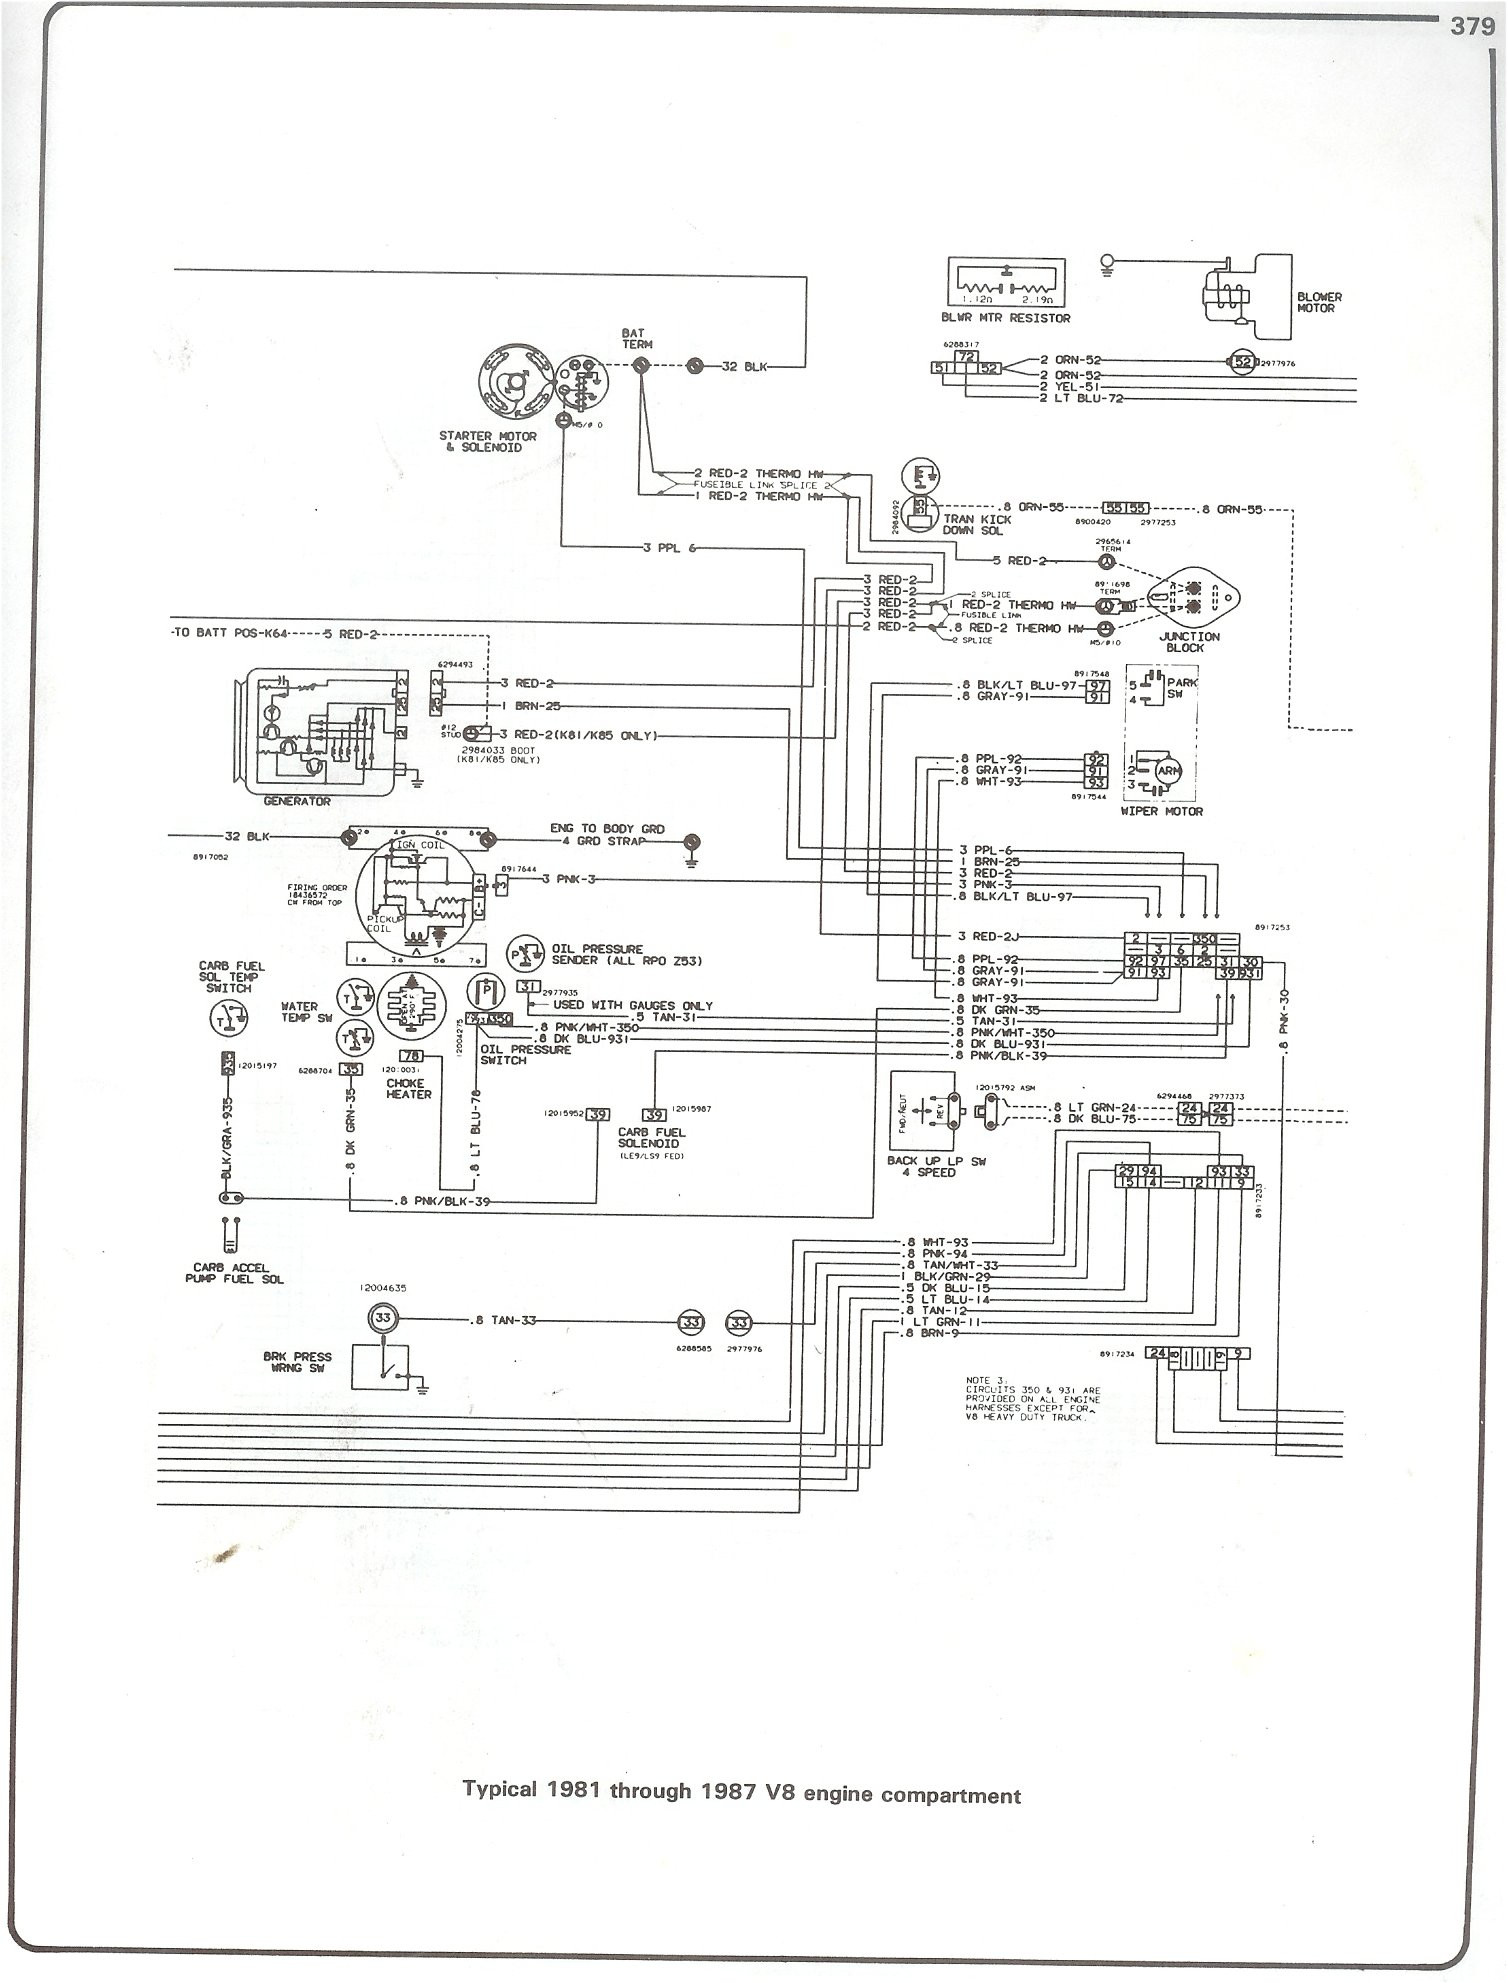 1959 Chevy Truck Wiring Diagram Complete 73-87 Wiring Diagrams Of 1959 Chevy Truck Wiring Diagram